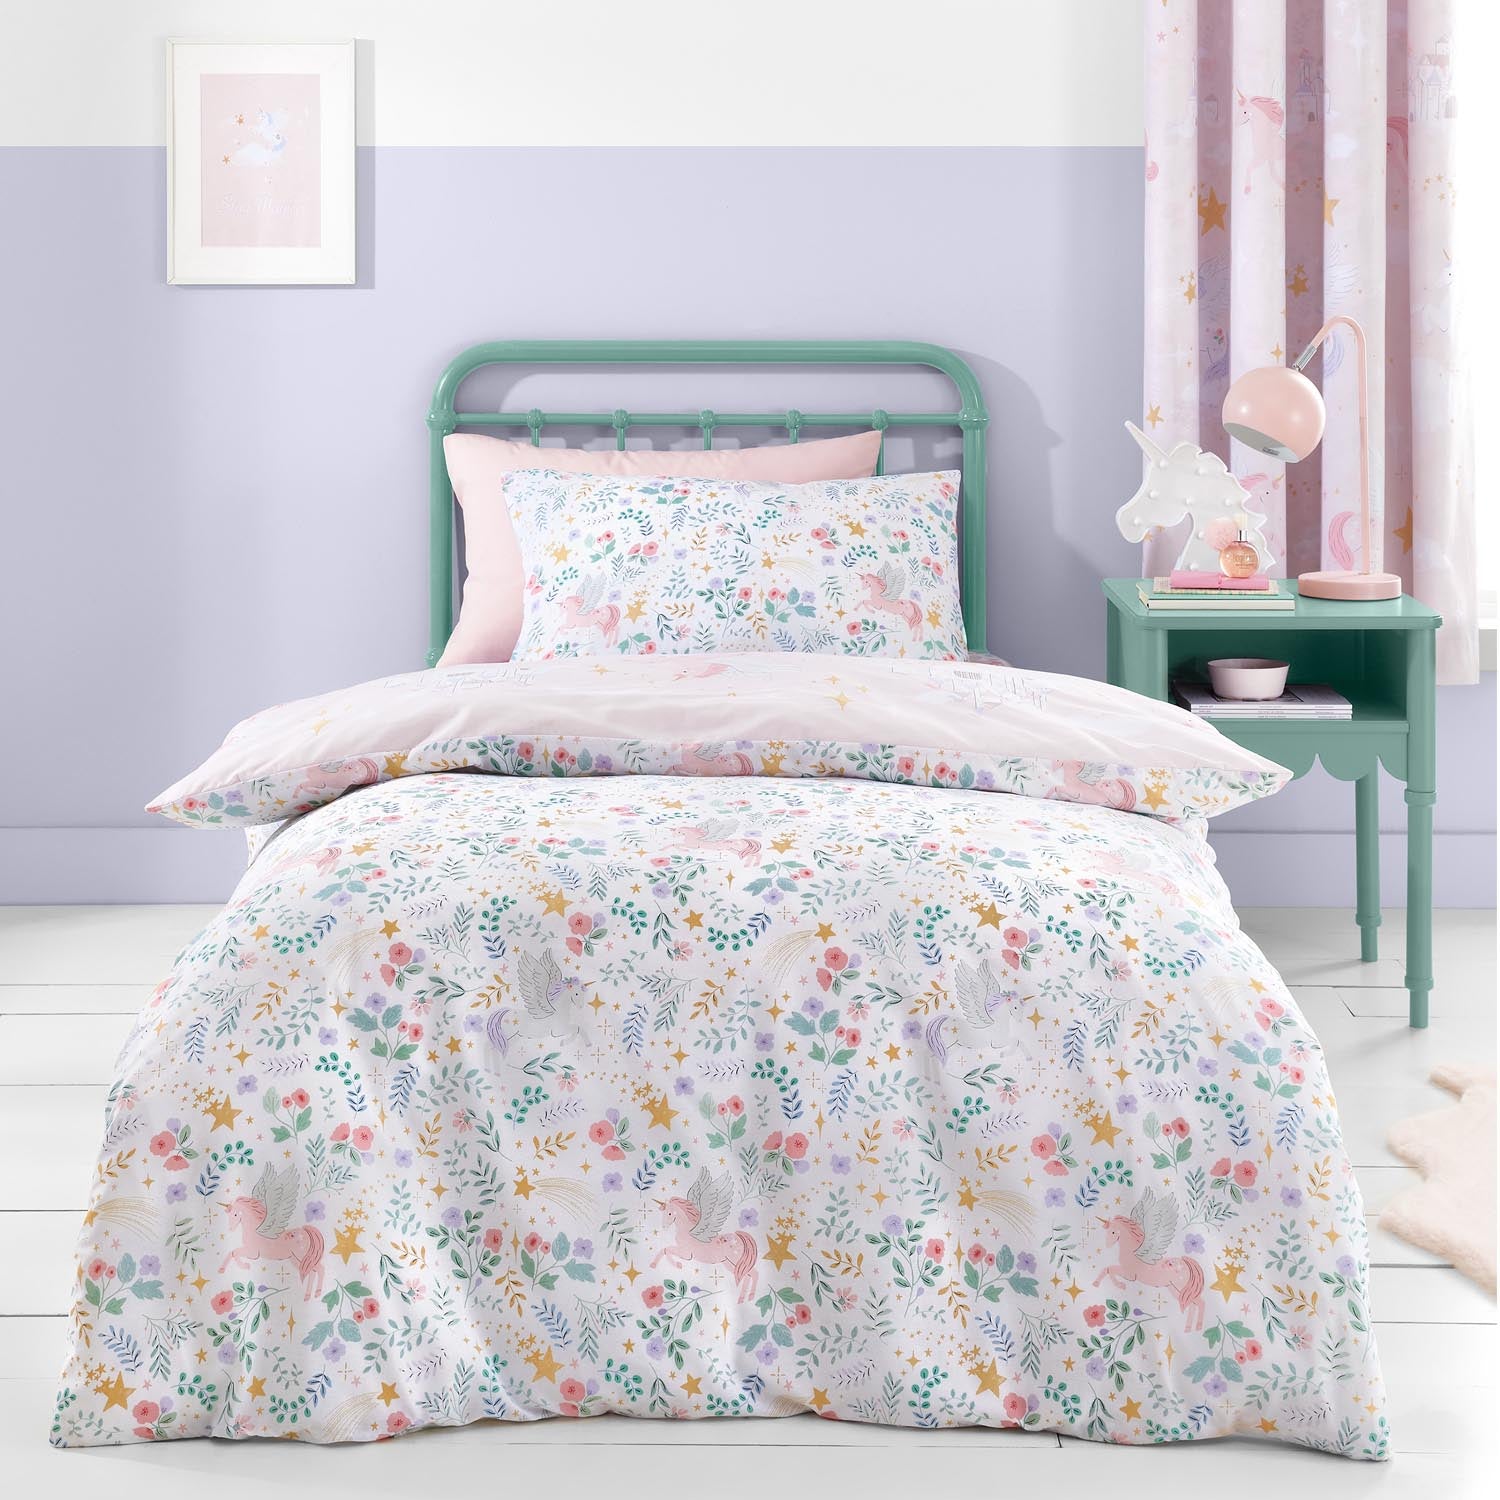 The Home Luxury Collection Magical Unicorn Duvet Cover Set 1 Shaws Department Stores